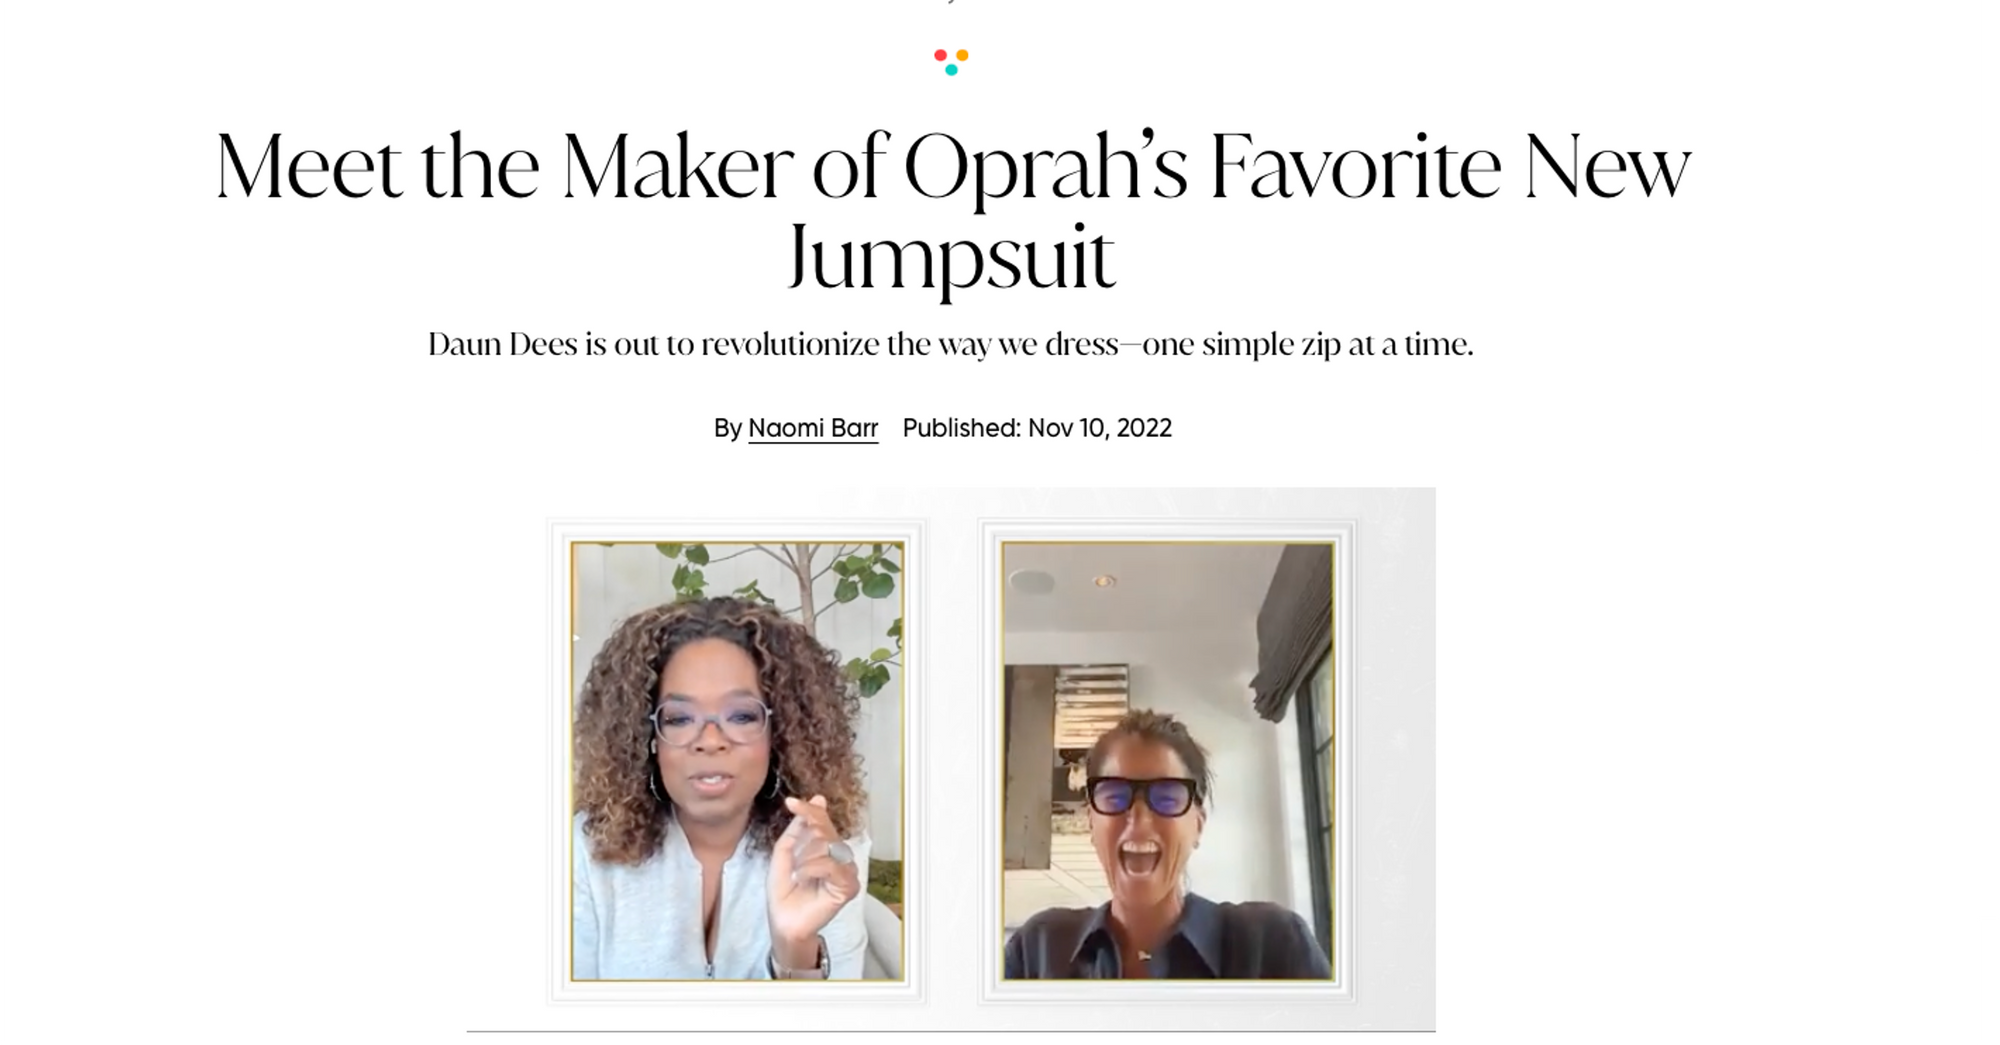 Oprah Daily Feature | Meet the Maker of Oprah's Favorite New Jumpsuit